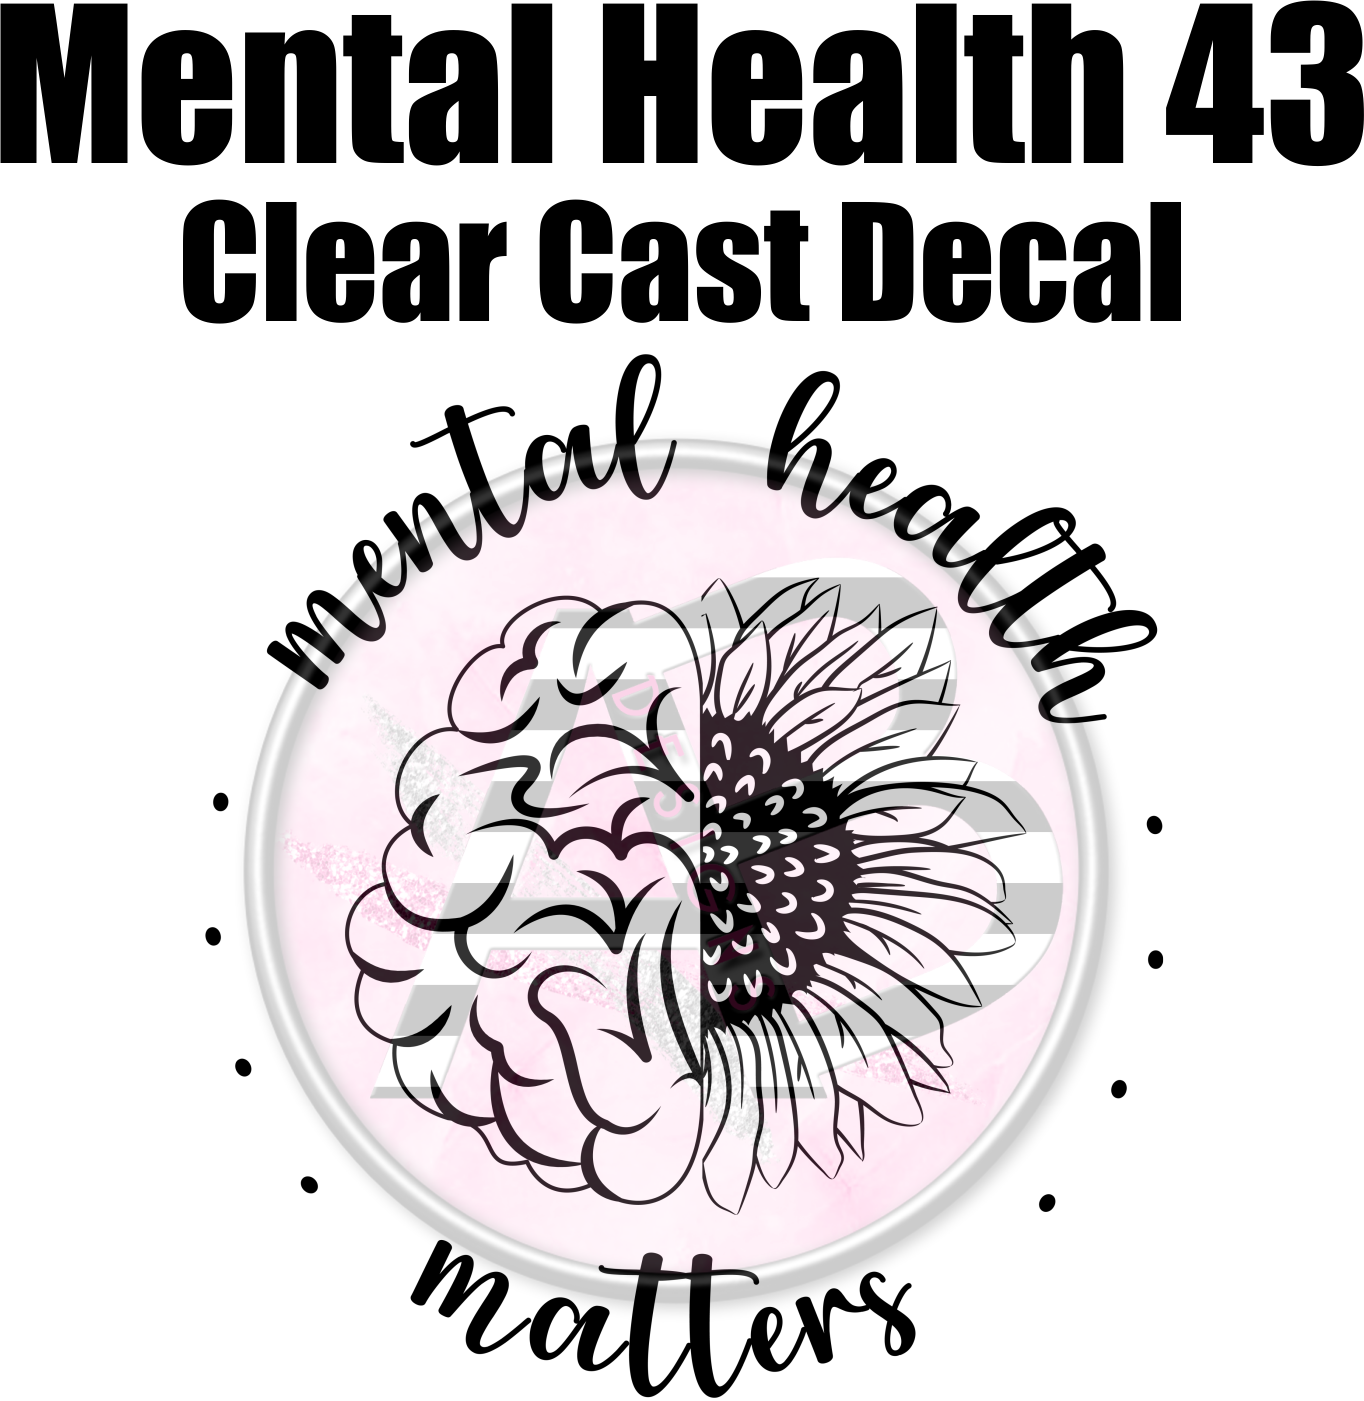 Mental Health 43 - Clear Cast Decal - 336